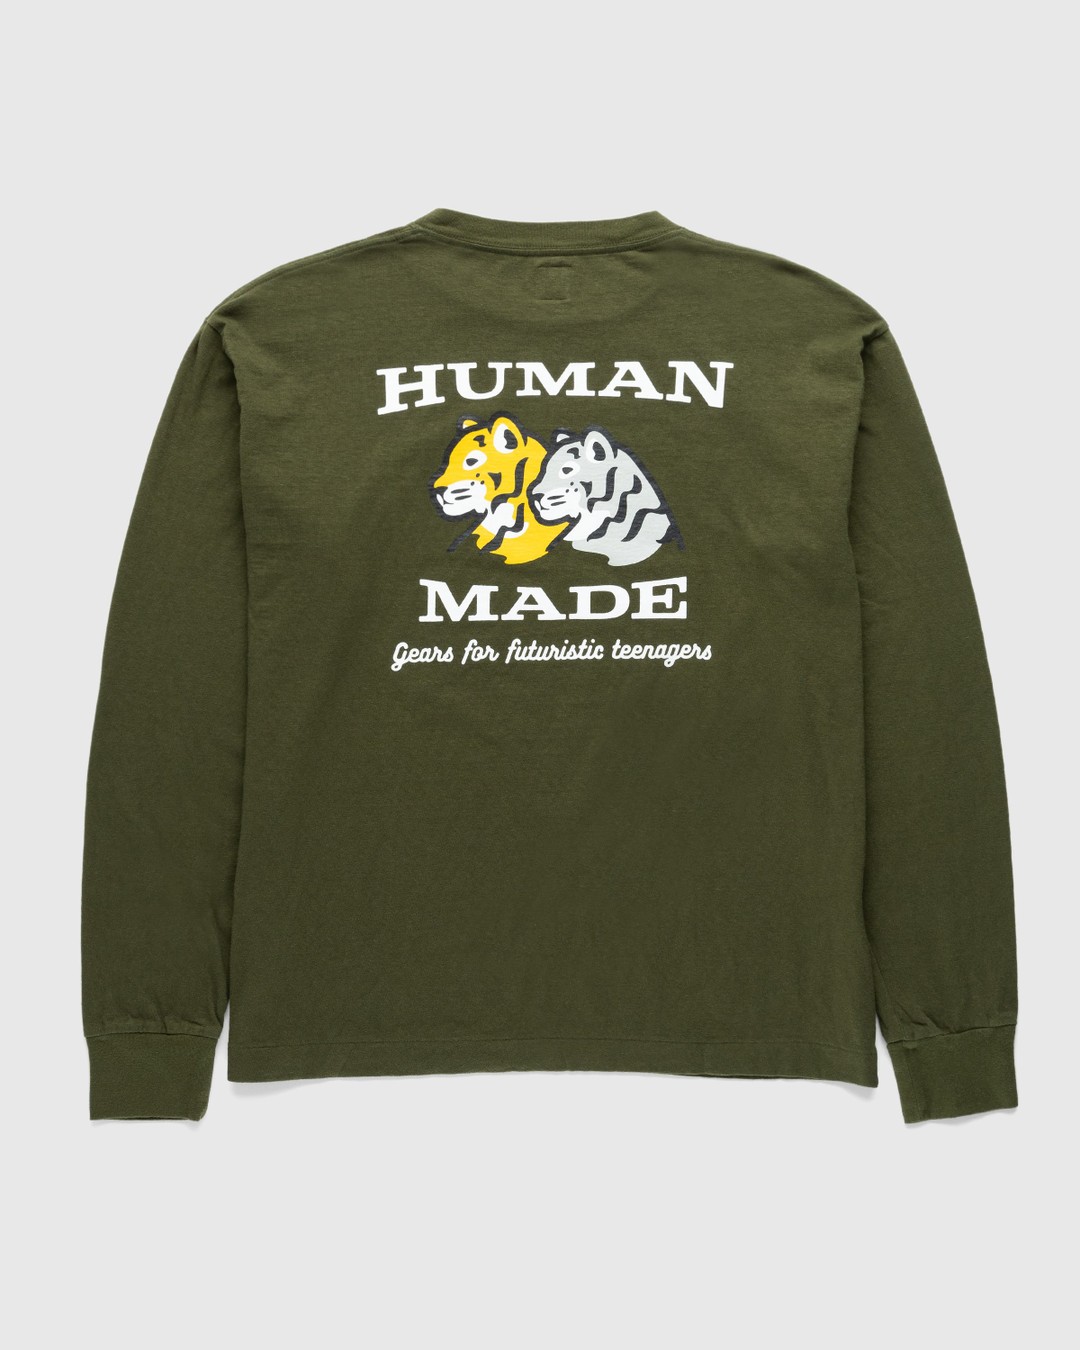 Human Made – GRAPHIC L/S T-SHIRT #1 Olive Drab | Highsnobiety Shop